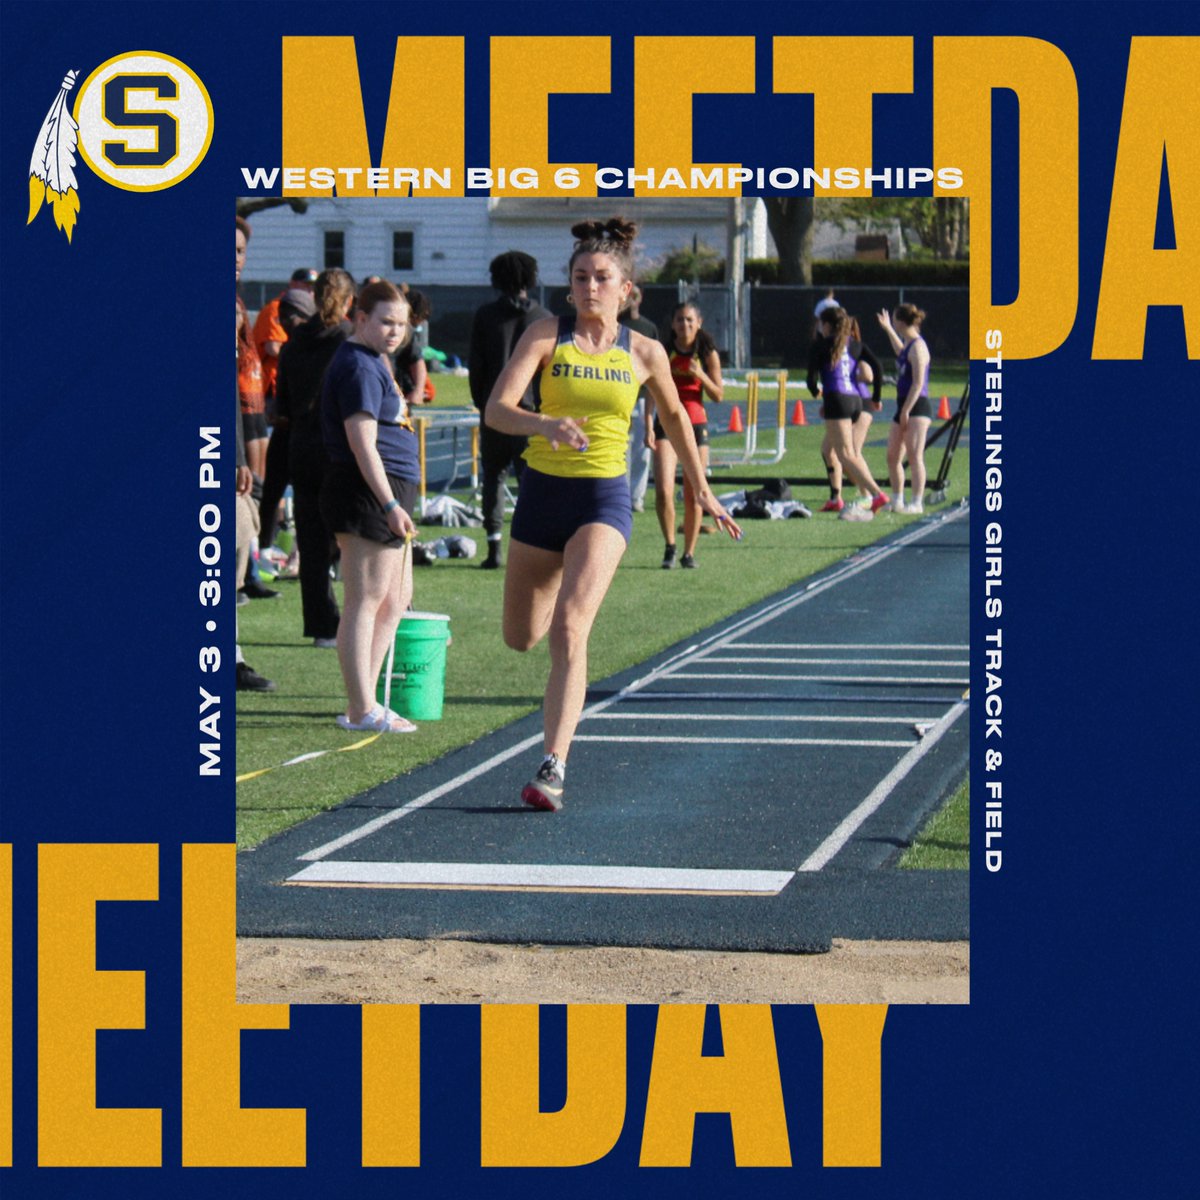 It's post-season time for Girls Track and Field. Good luck at the conference meet today, ladies! #GOldenWARRIORS 💪💫